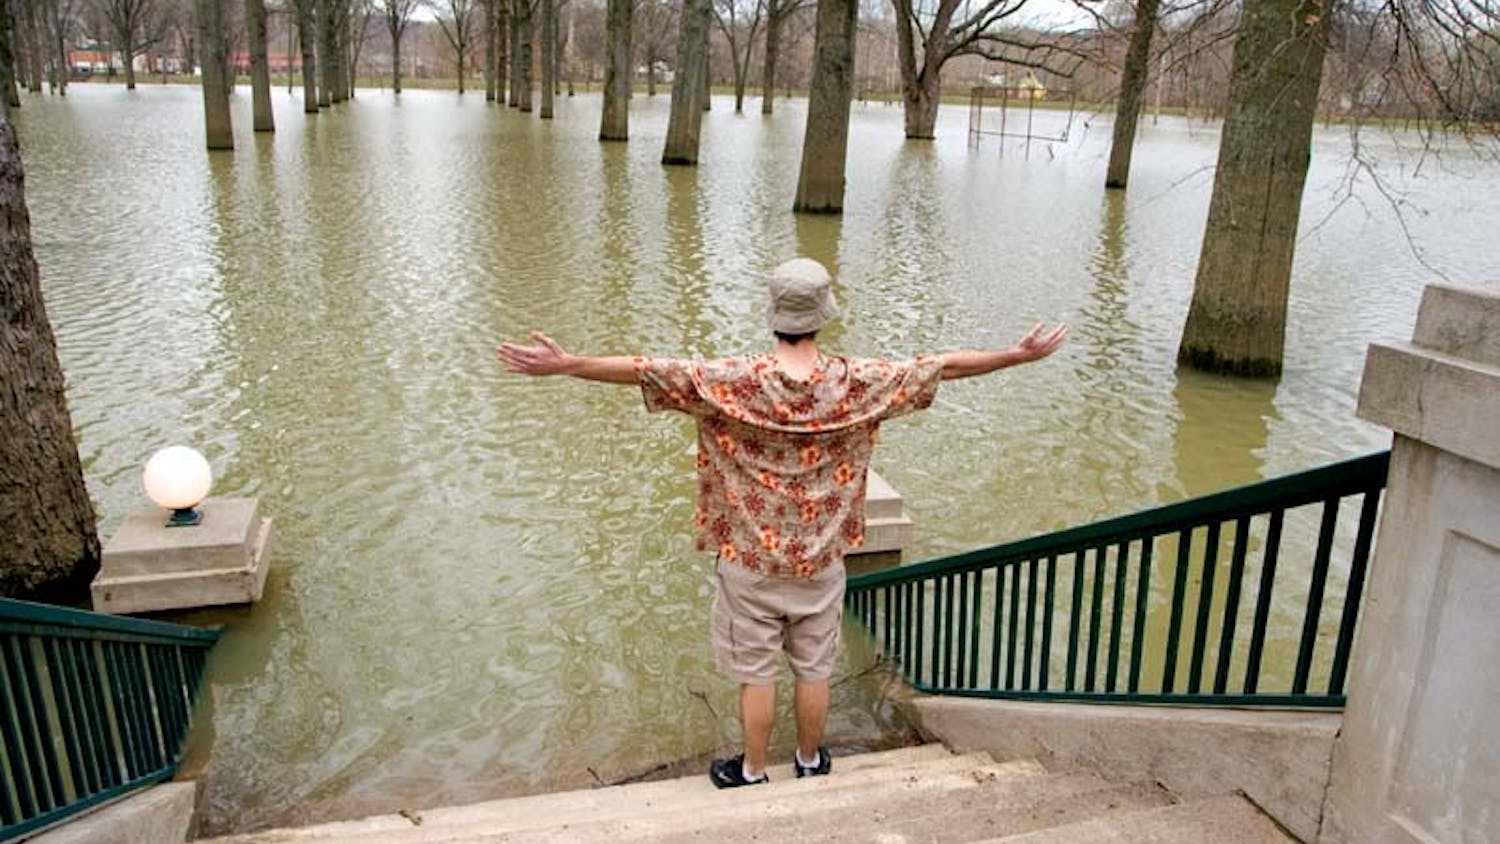 "I'm the king of the world!" Scott exclaimed while overlooking the flooded grounds of the West Baden Springs Hotel.